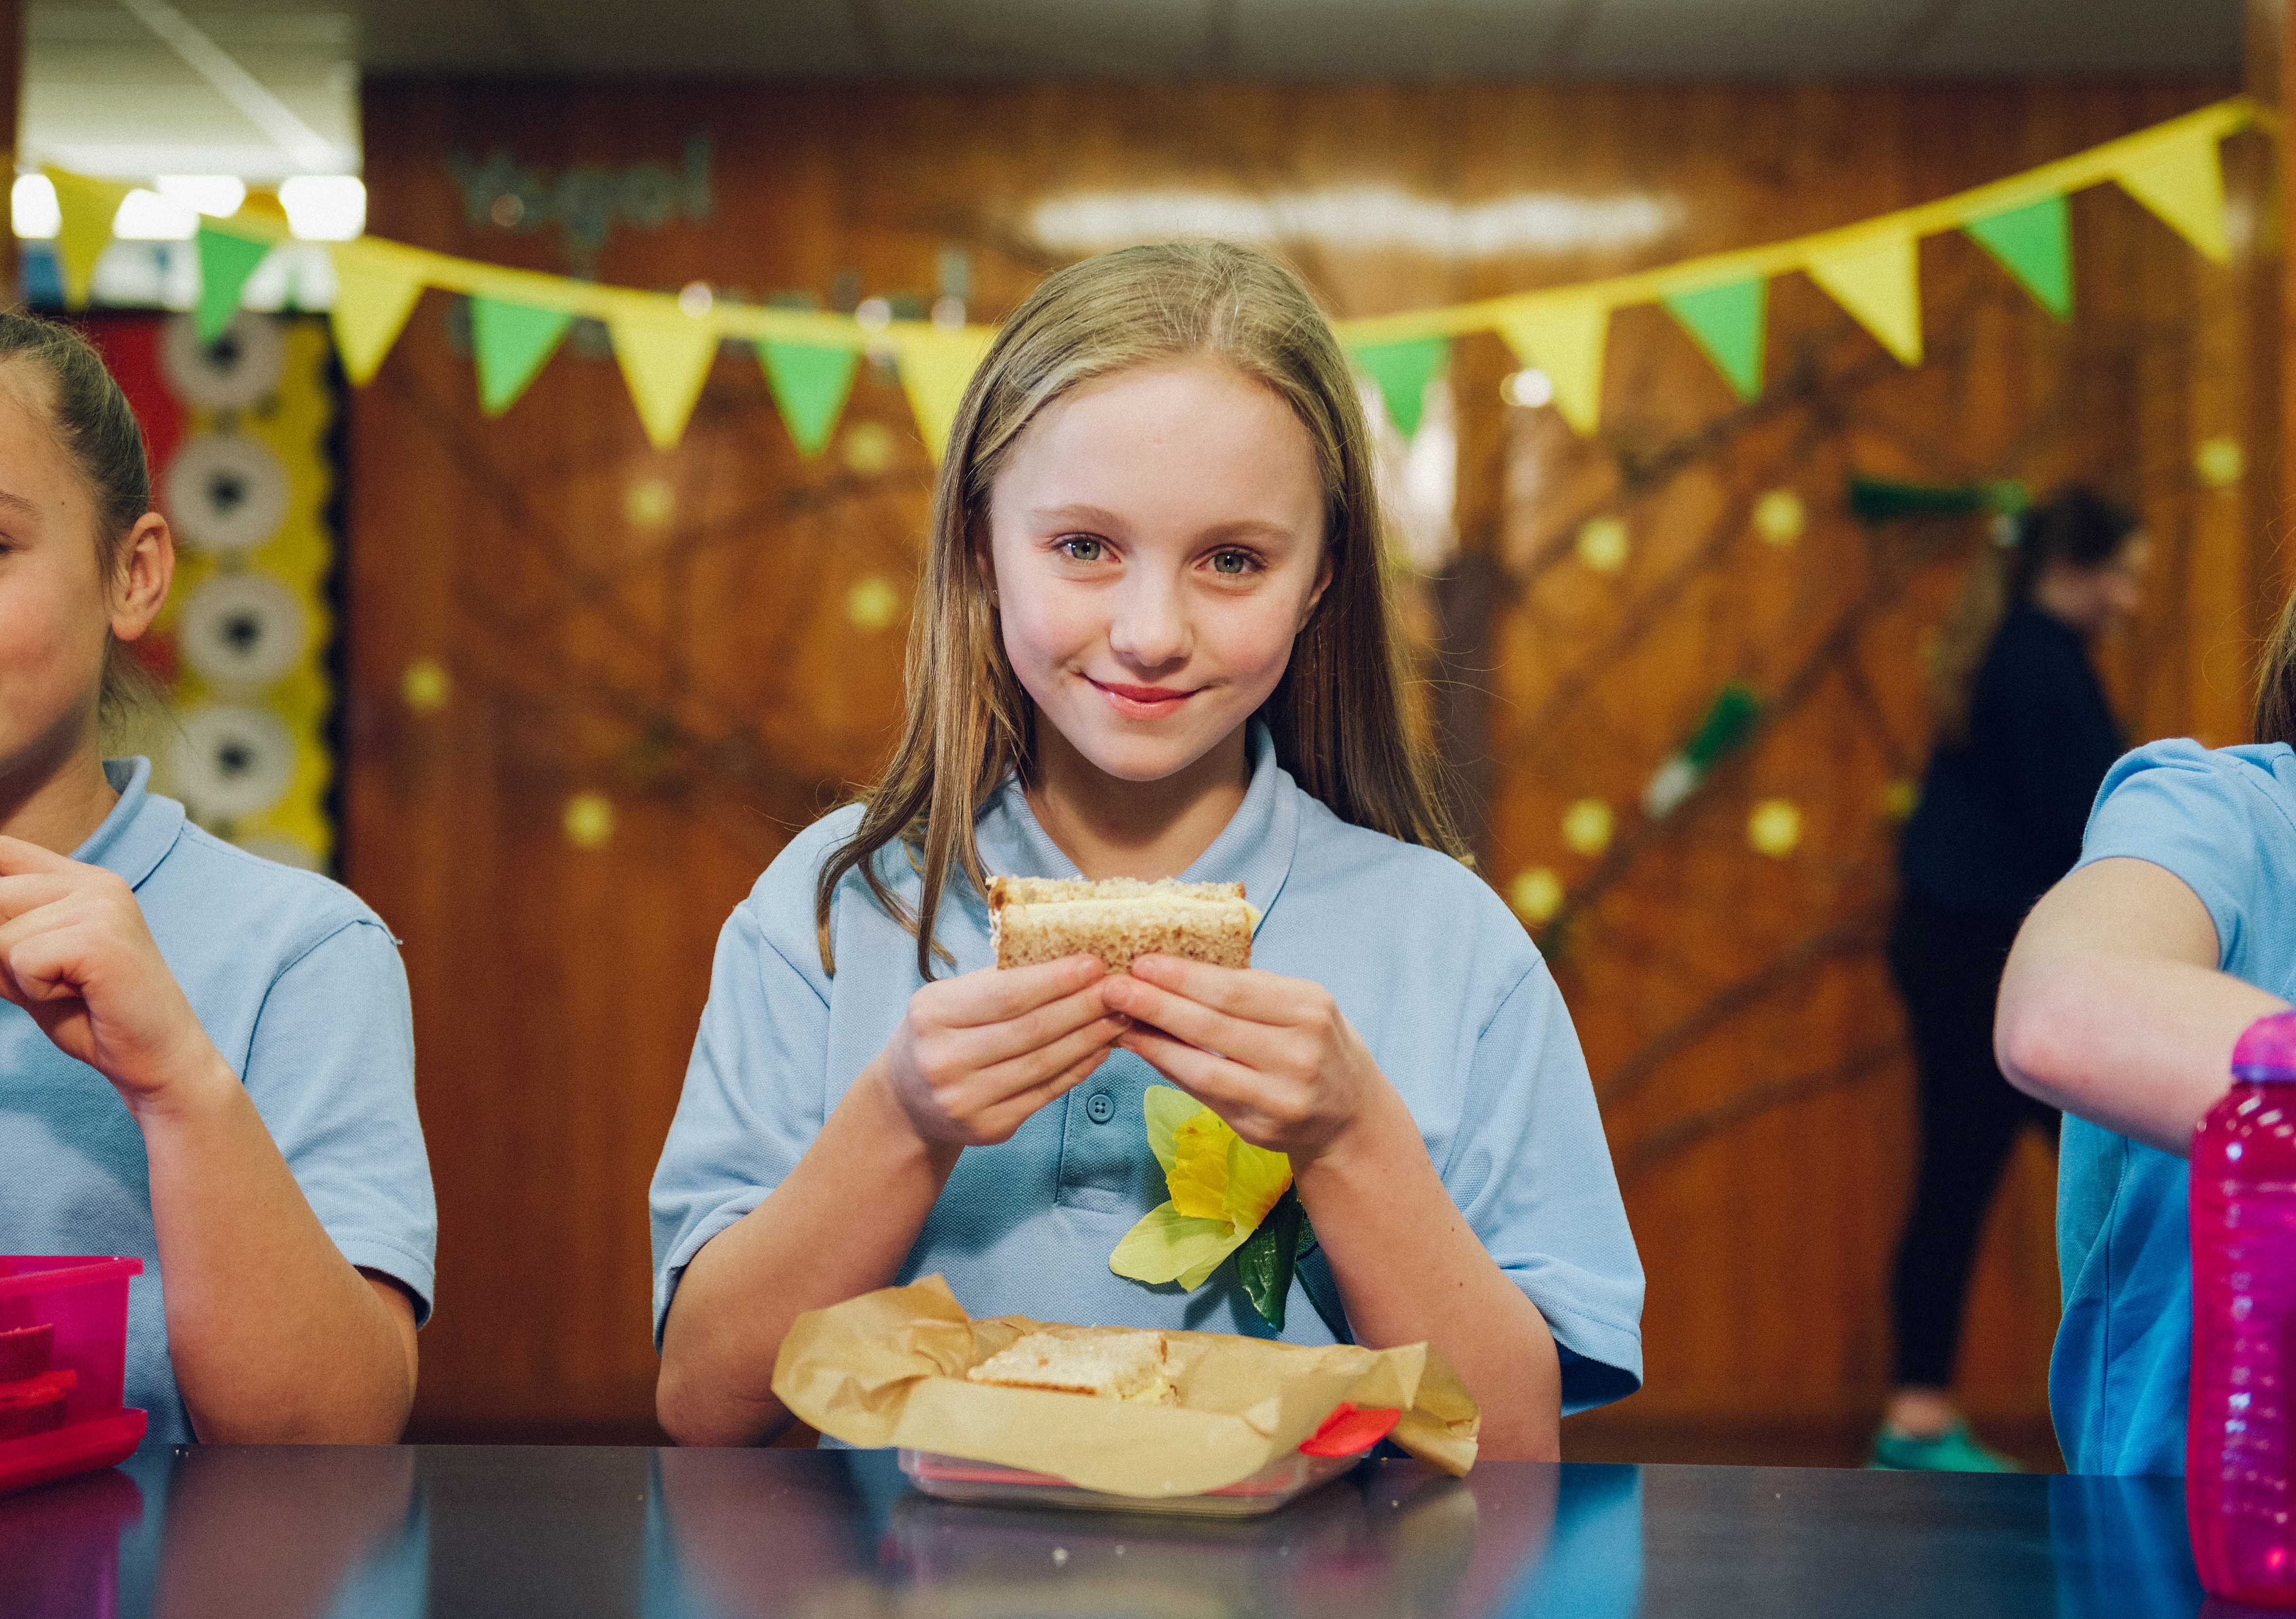 Schoolgirl Efa is the face of inspirational St David’s Day campaign celebrating pride in Wales